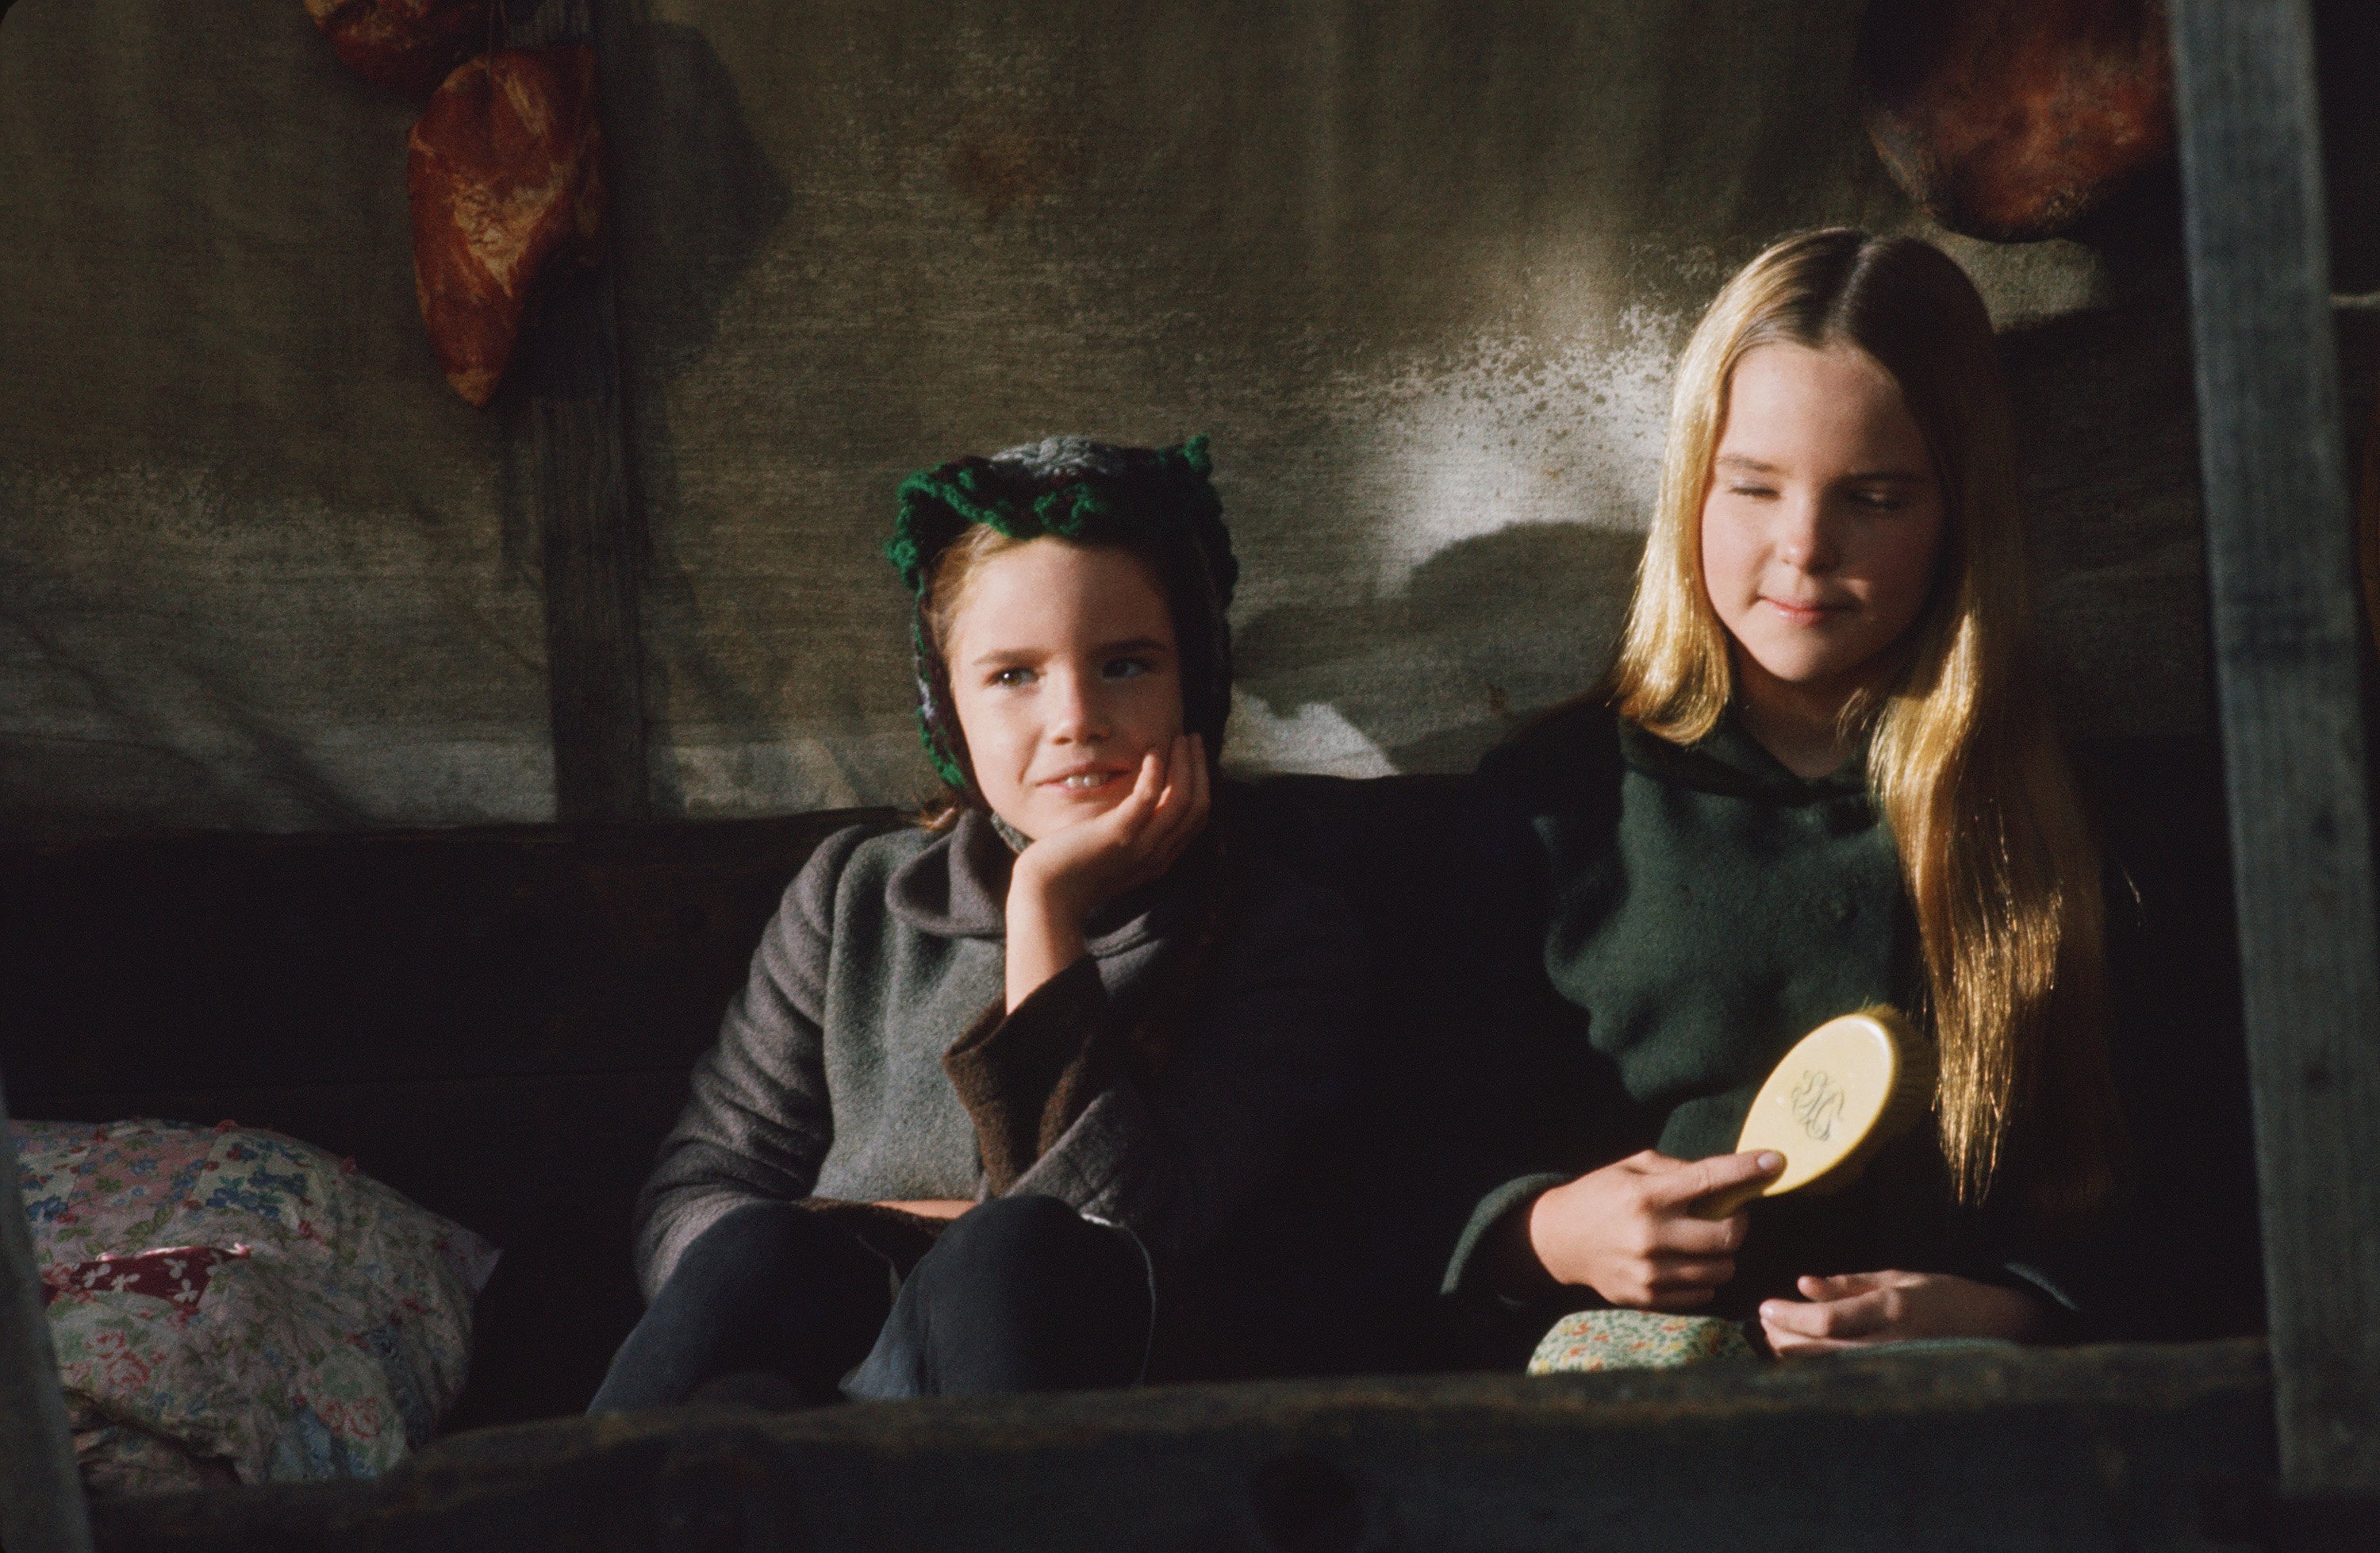 Melissa Gilbert as Laura Elizabeth Ingalls Wilder, Melisssa Sue Anderson as Mary Ingalls Kendall in the pilot of 'Little House on the Prairie'